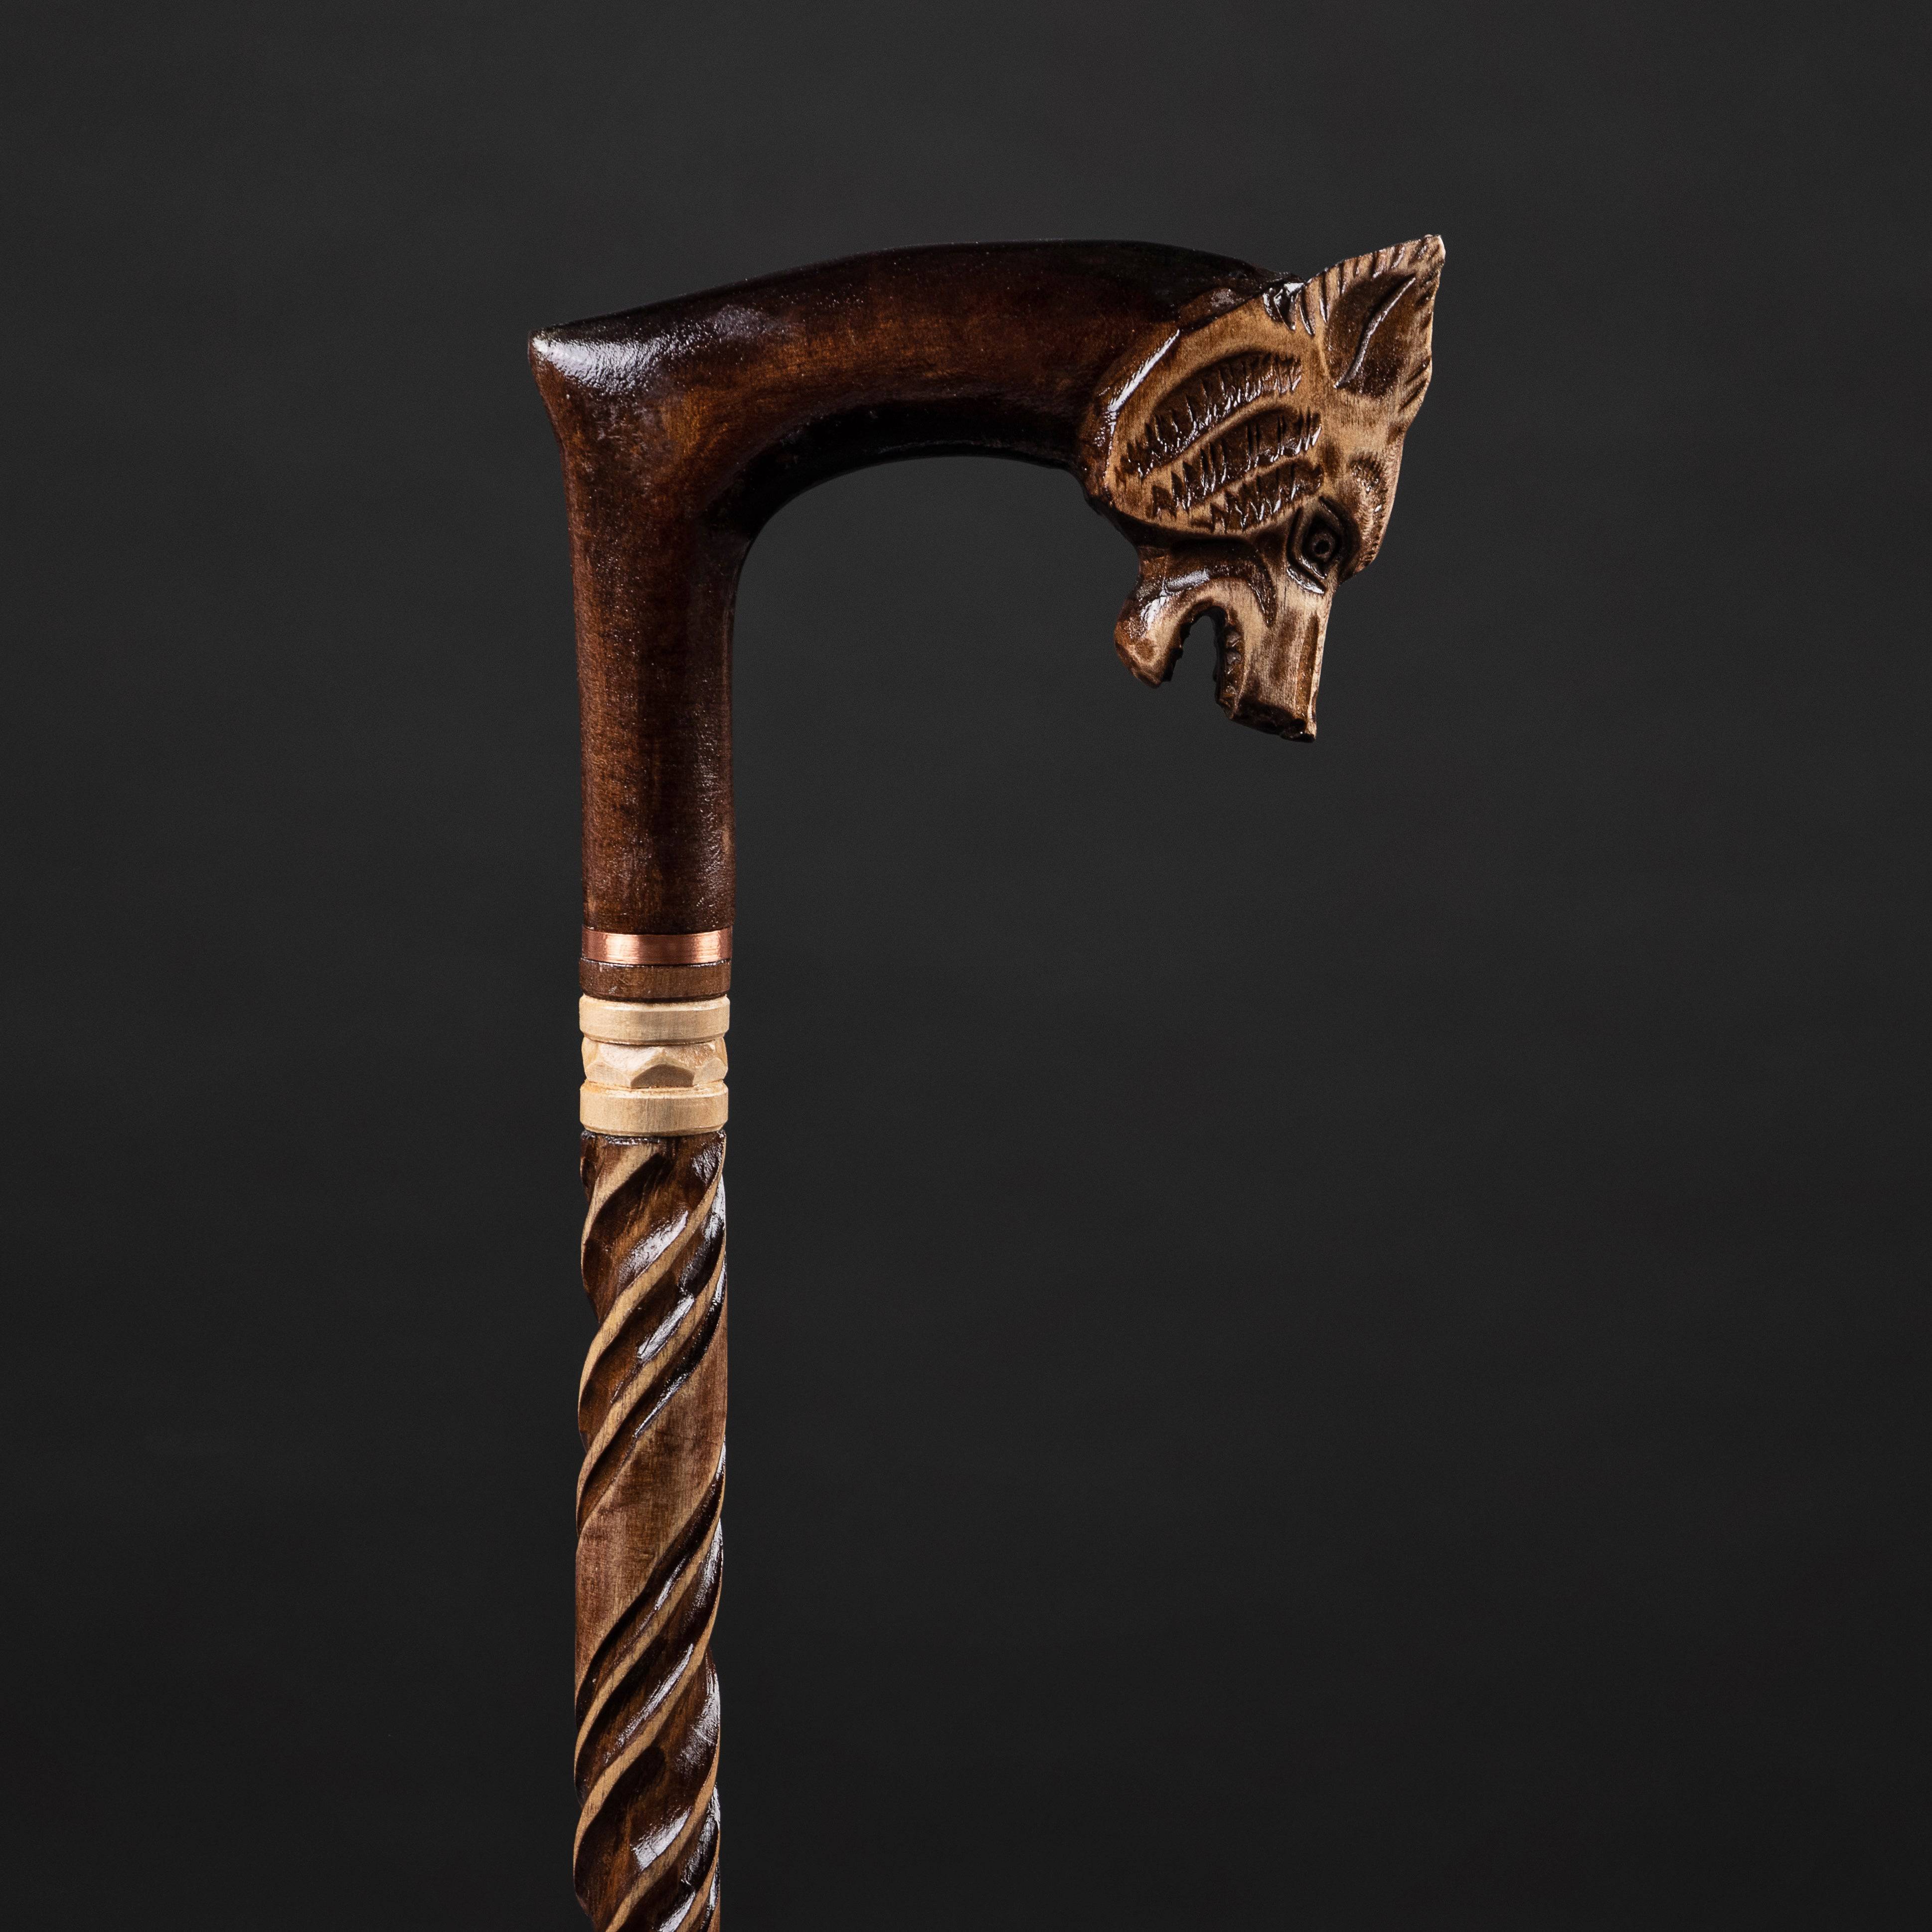 Skull Walking Stick, Hand Carved Hiking Stick, Wood Carving, by